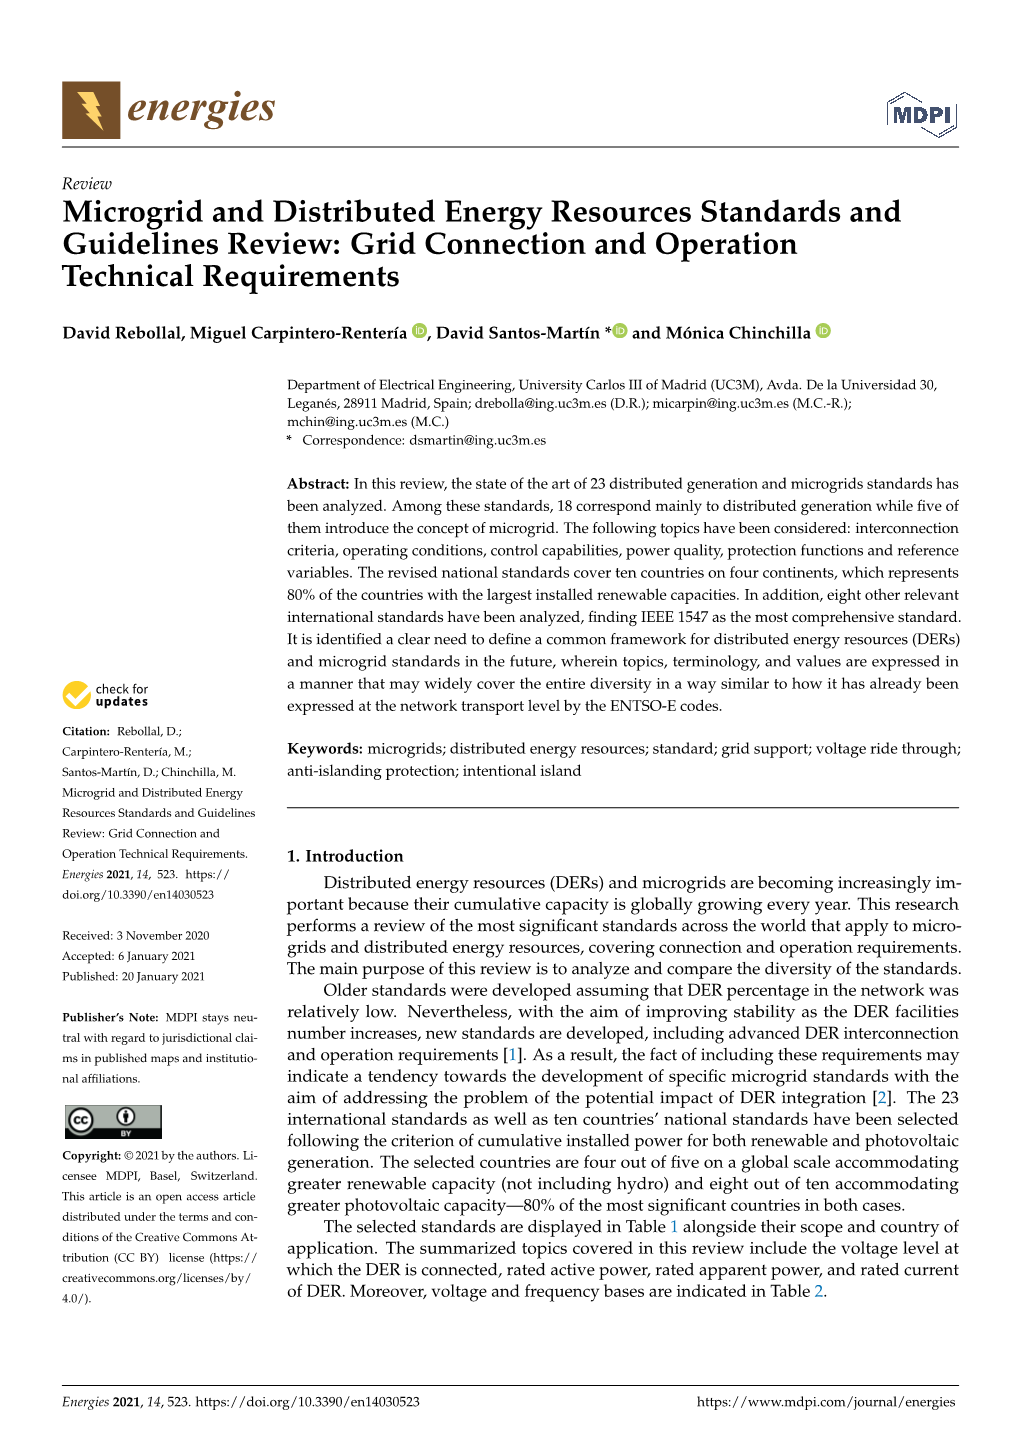 Microgrid and Distributed Energy Resources Standards and Guidelines Review: Grid Connection and Operation Technical Requirements